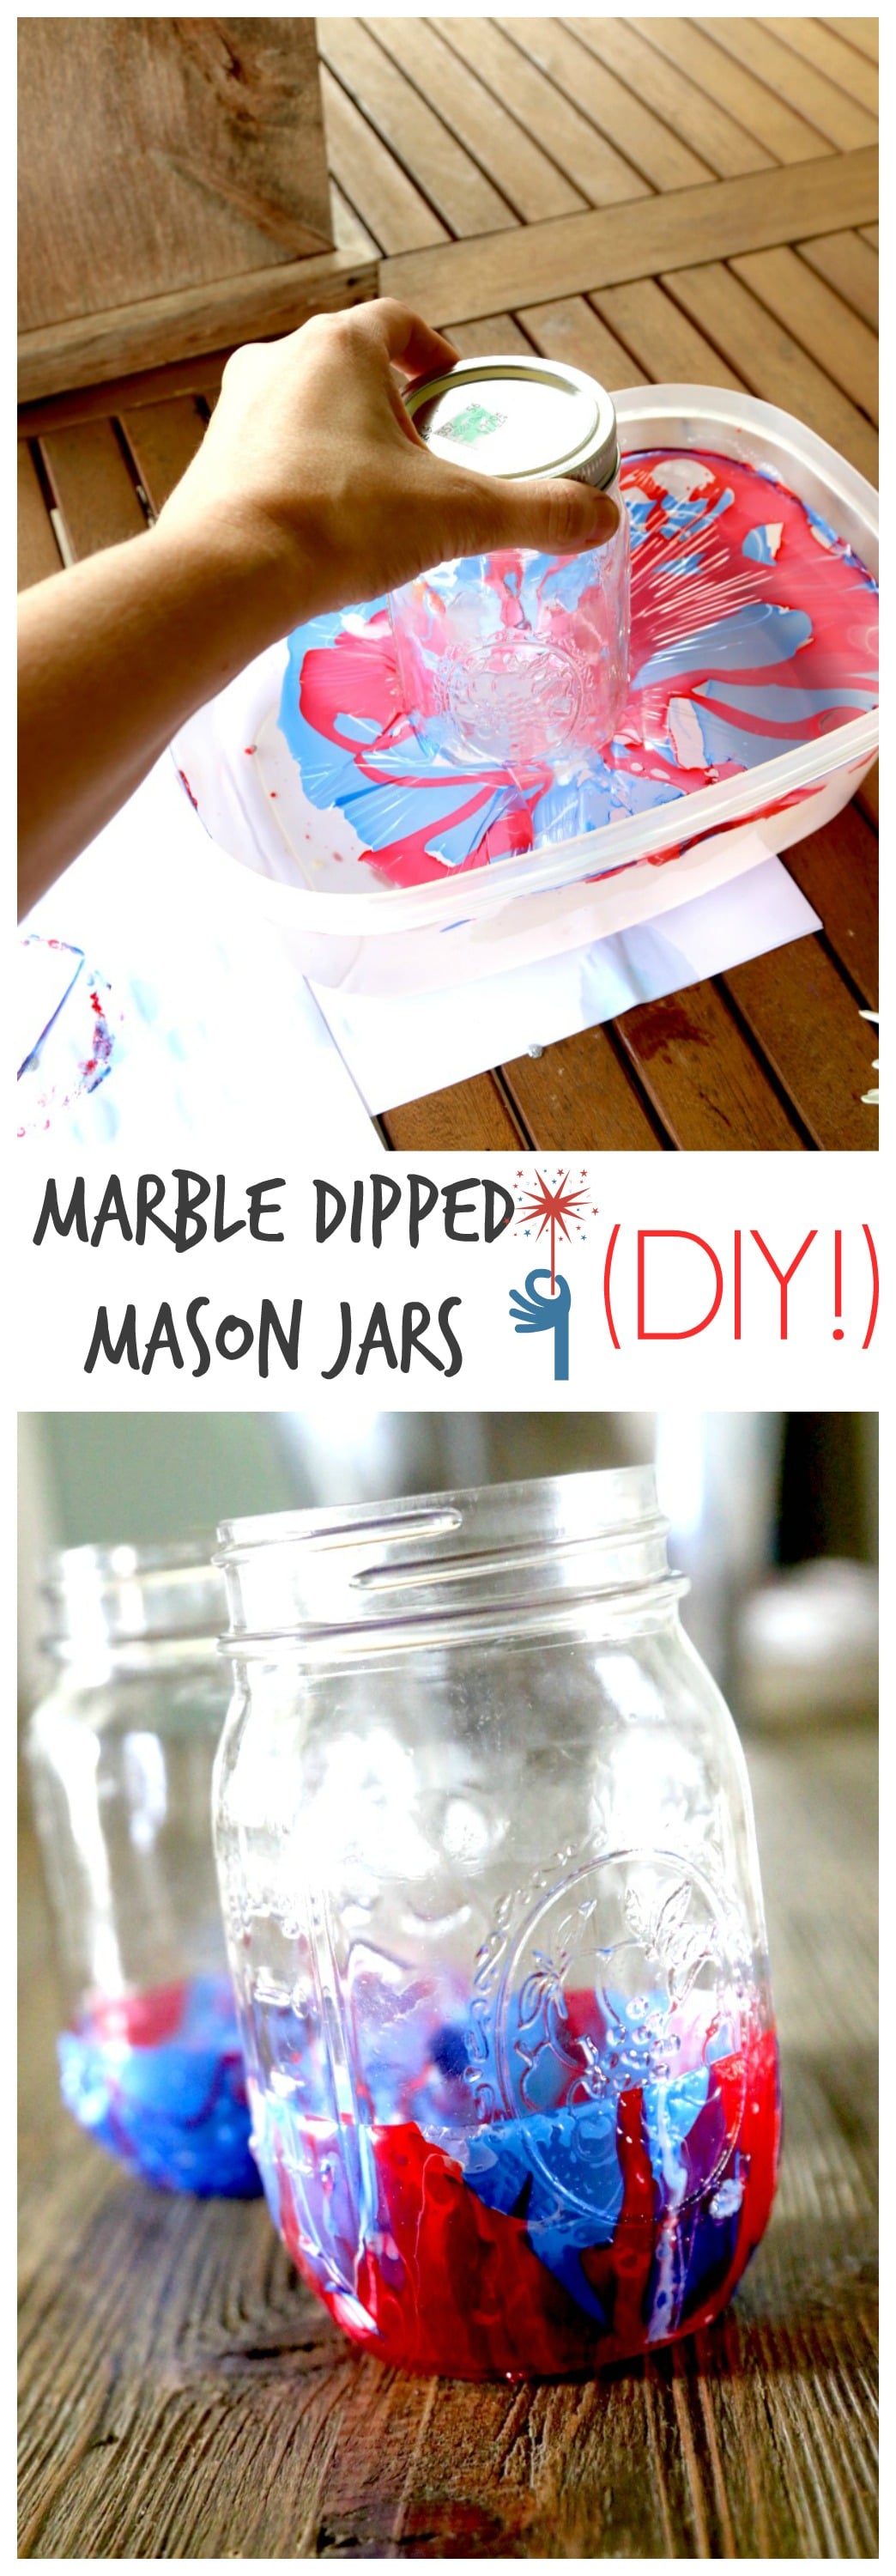 Marble Dipped Mason Jars: The easiest and quickest way to decorate your jars gorgeously. Truly a 5 minute craft with striking and different results every time. DIY Tutorial here